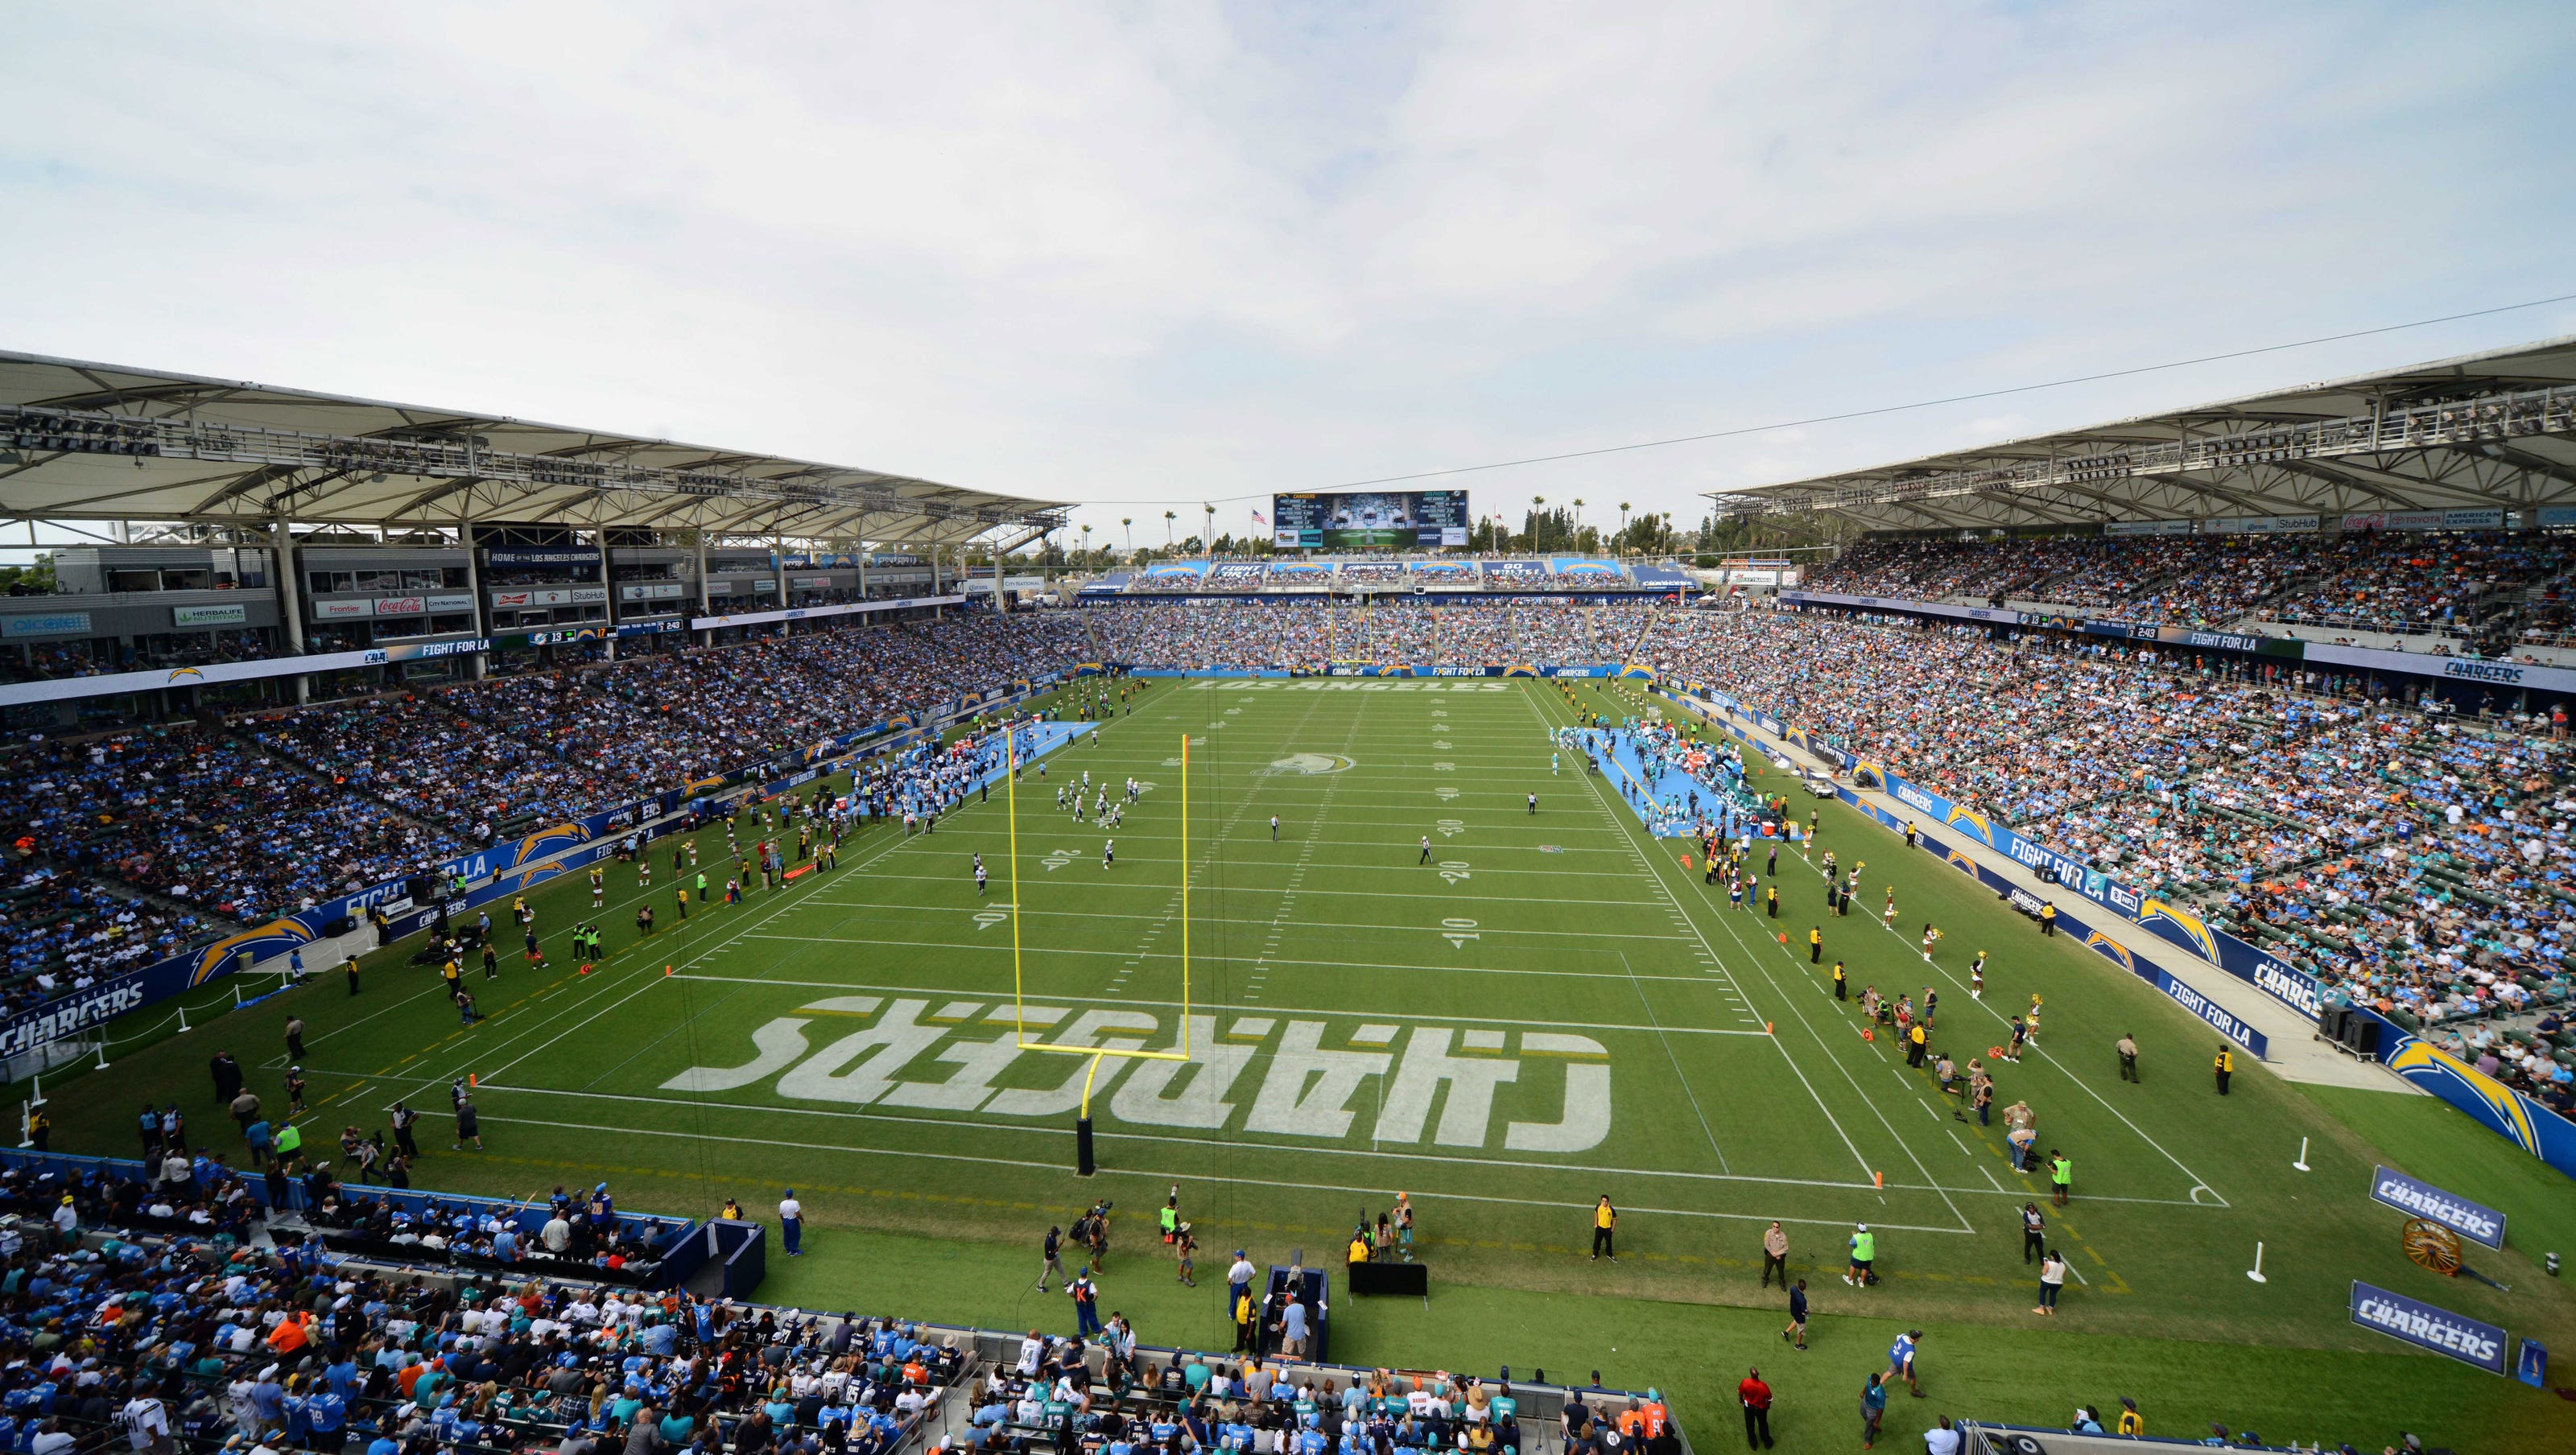 636434134528903193 USP NFL MIAMI DOLPHINS AT LOS ANGELES CHARGERS 93876605 - Ranking All 31 NFL Stadiums